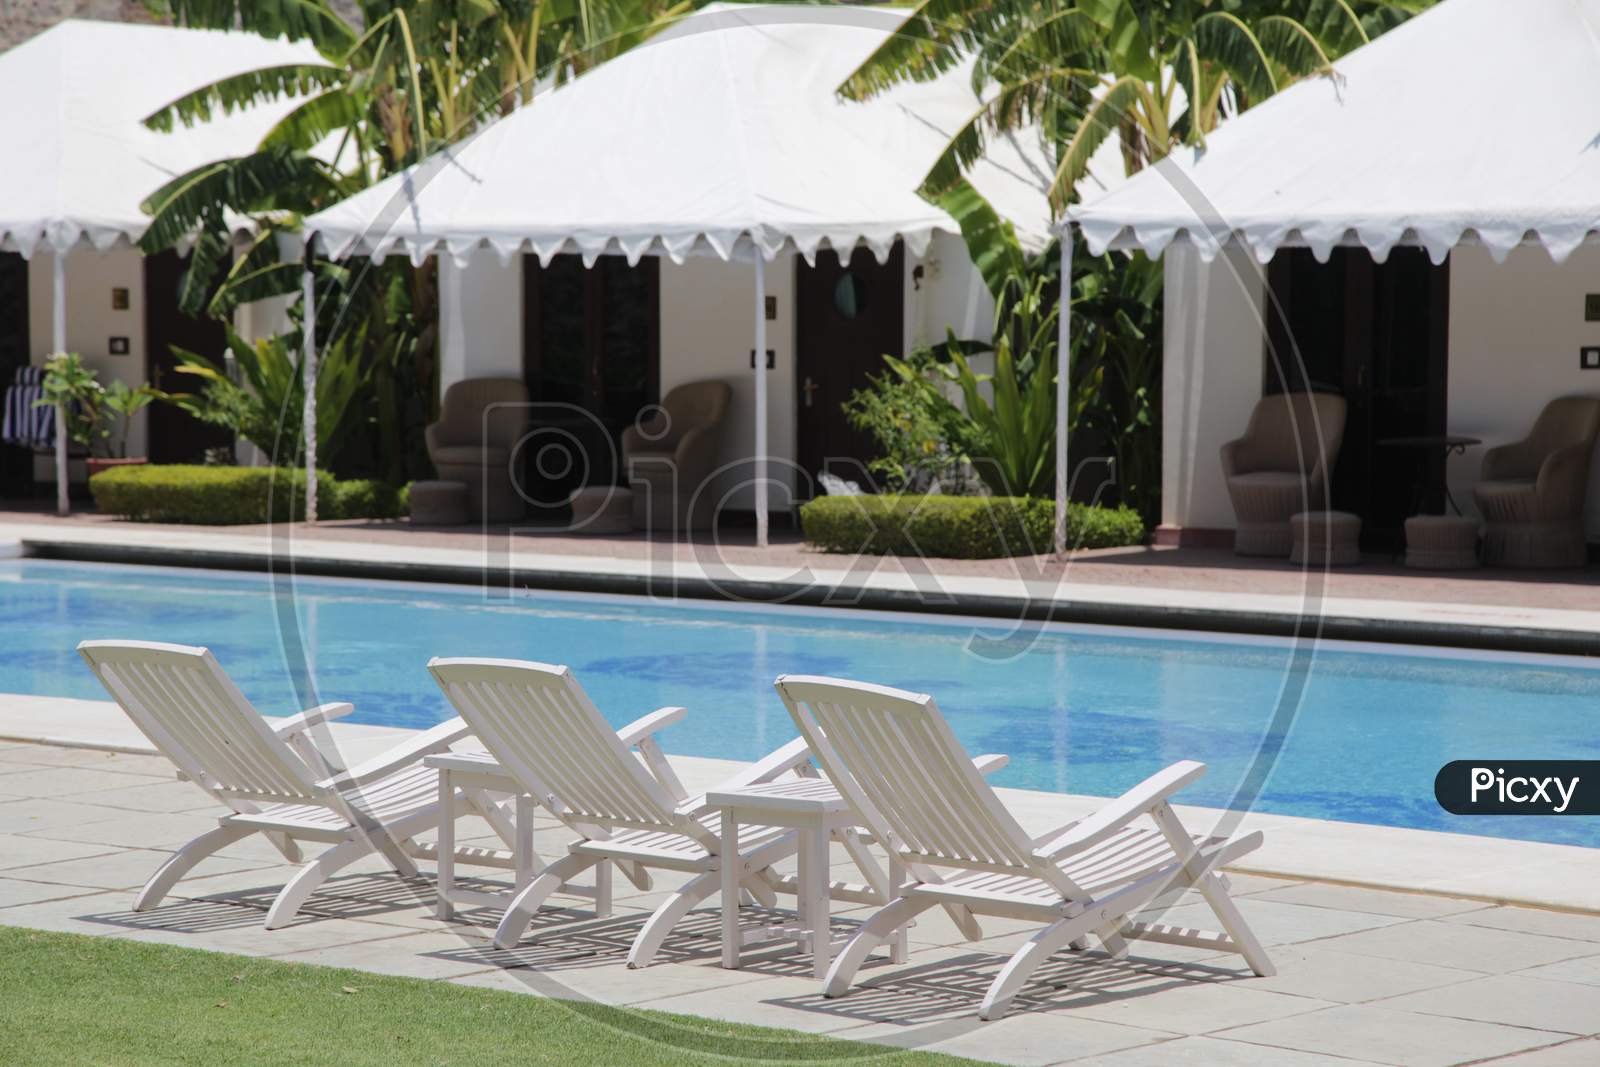 Outdoor chairs by the swimming pool